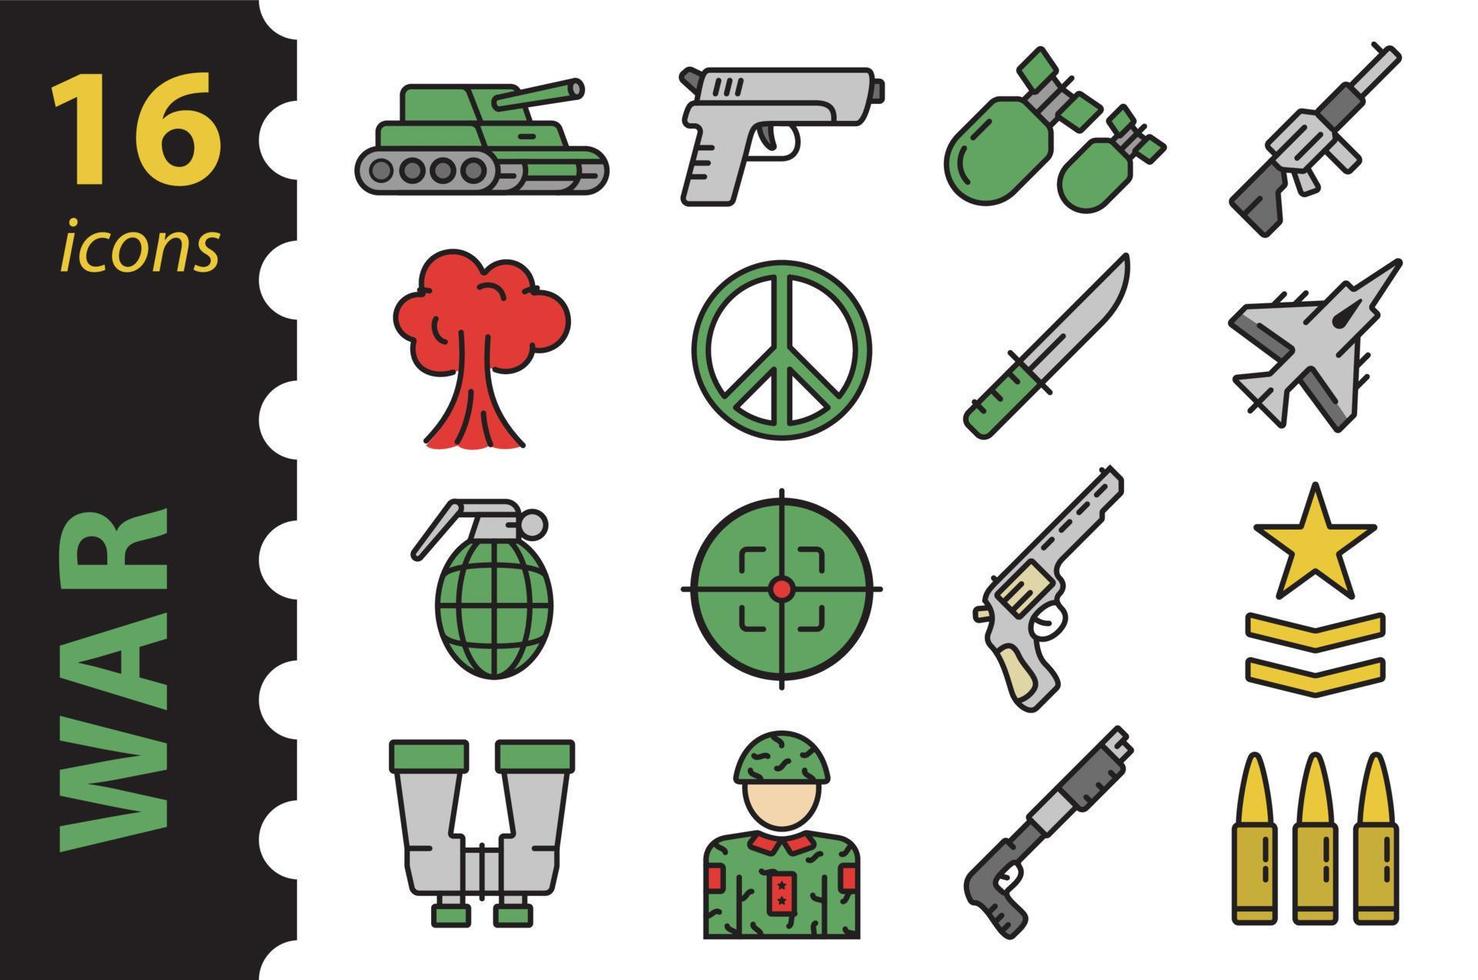 War icons set in color. Linear army symbols. Vector illustration in a flat style.